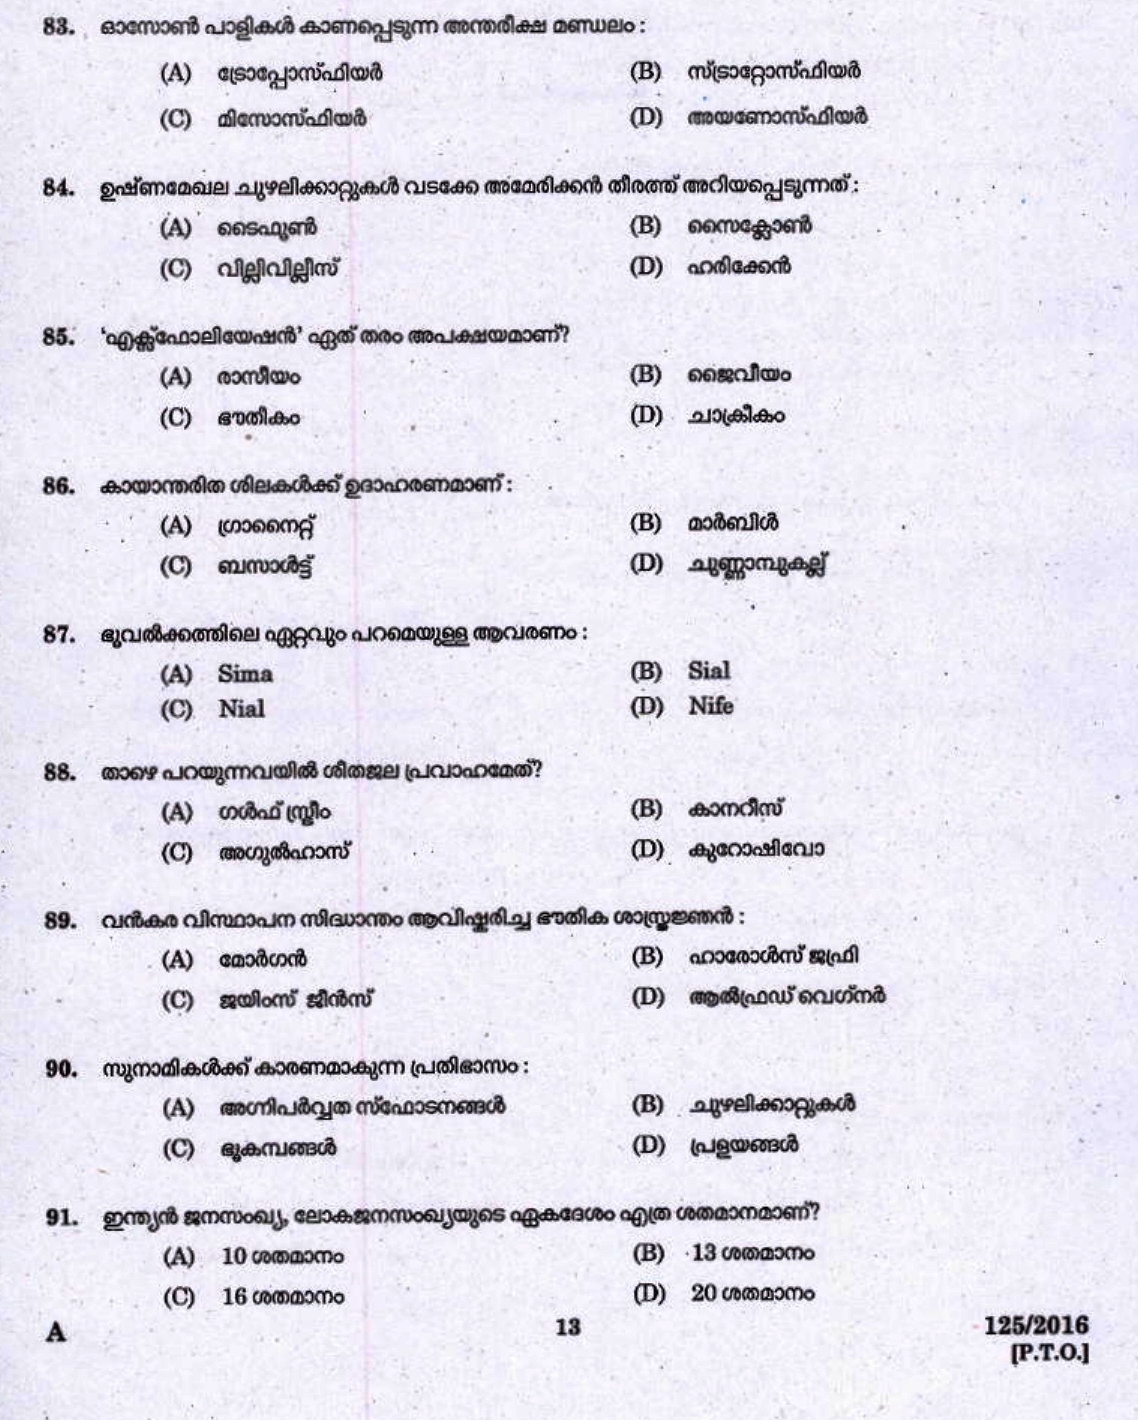 High School Assistant - Social Studies (125/2016) Question Paper with Answer Key